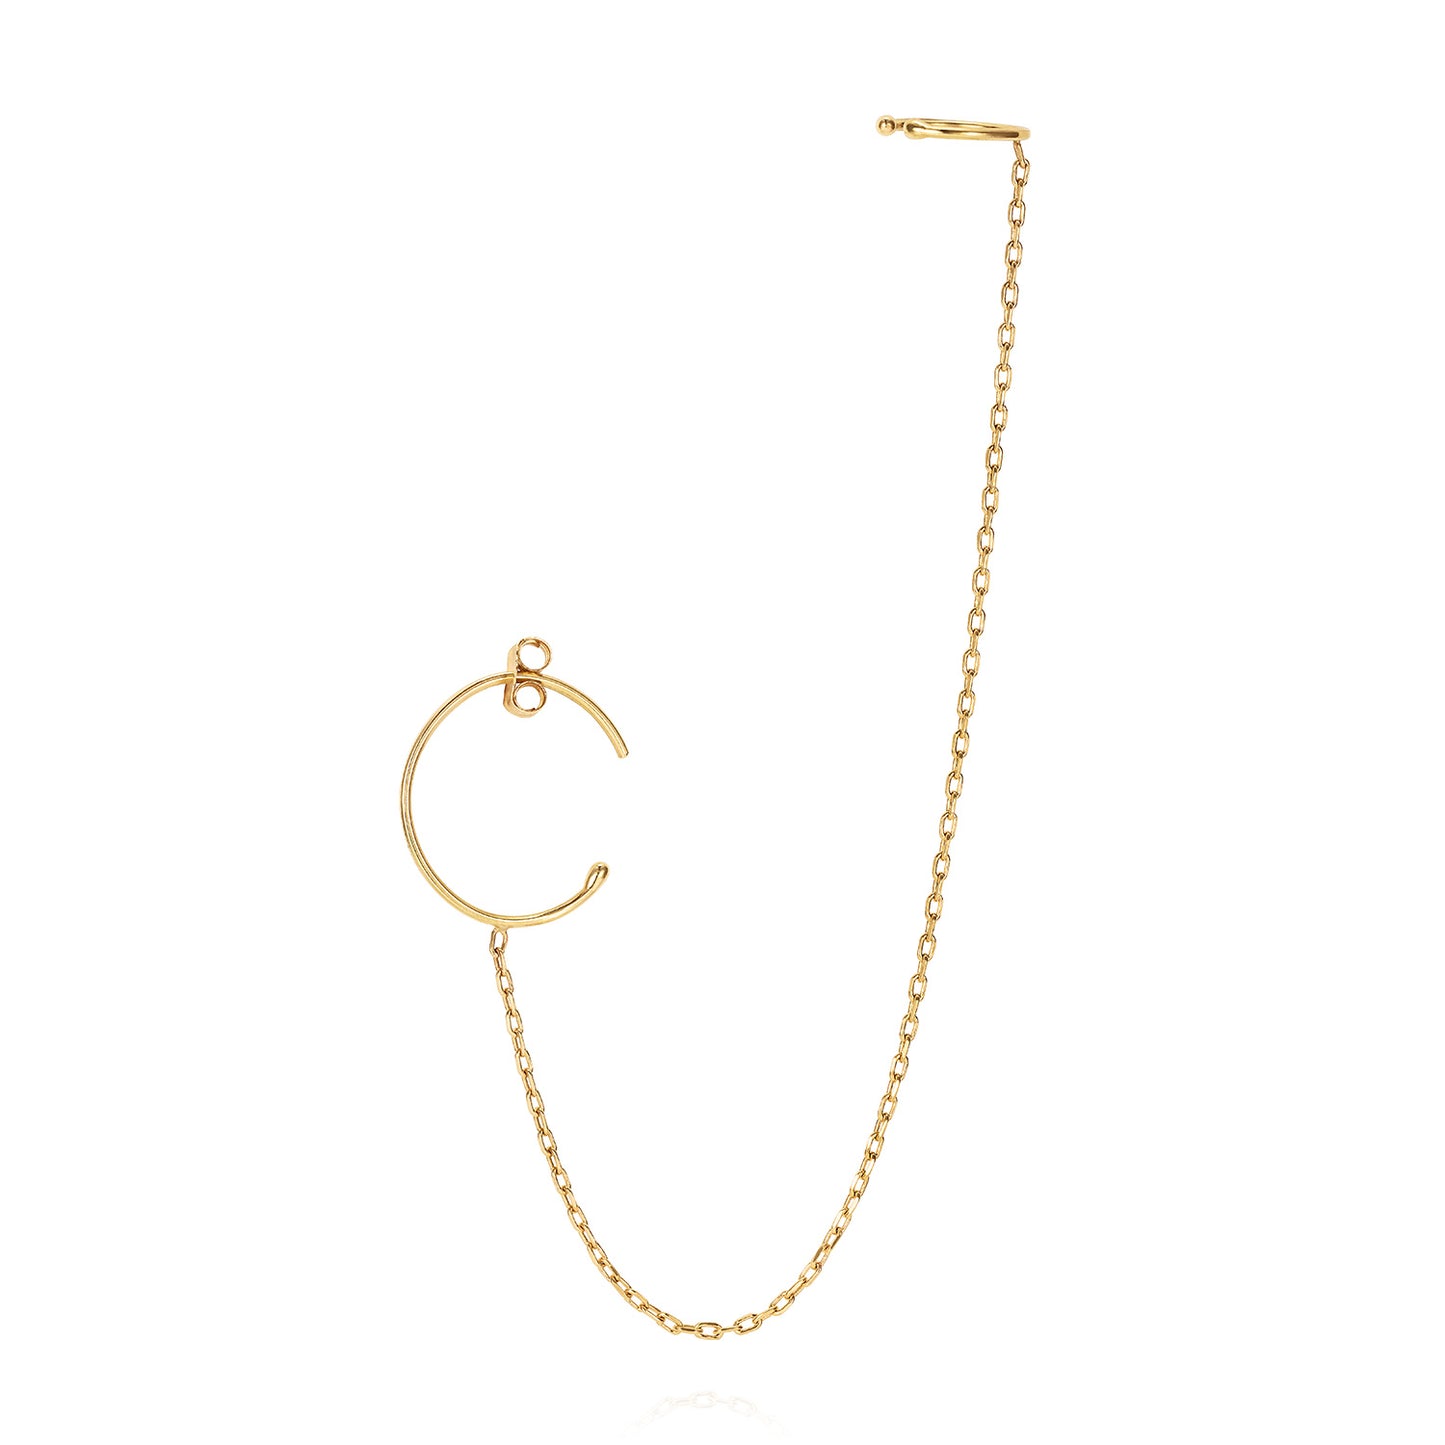 18 ct yellow gold hoop earring with chain attached to cuff for a modern Sweet Pea look.